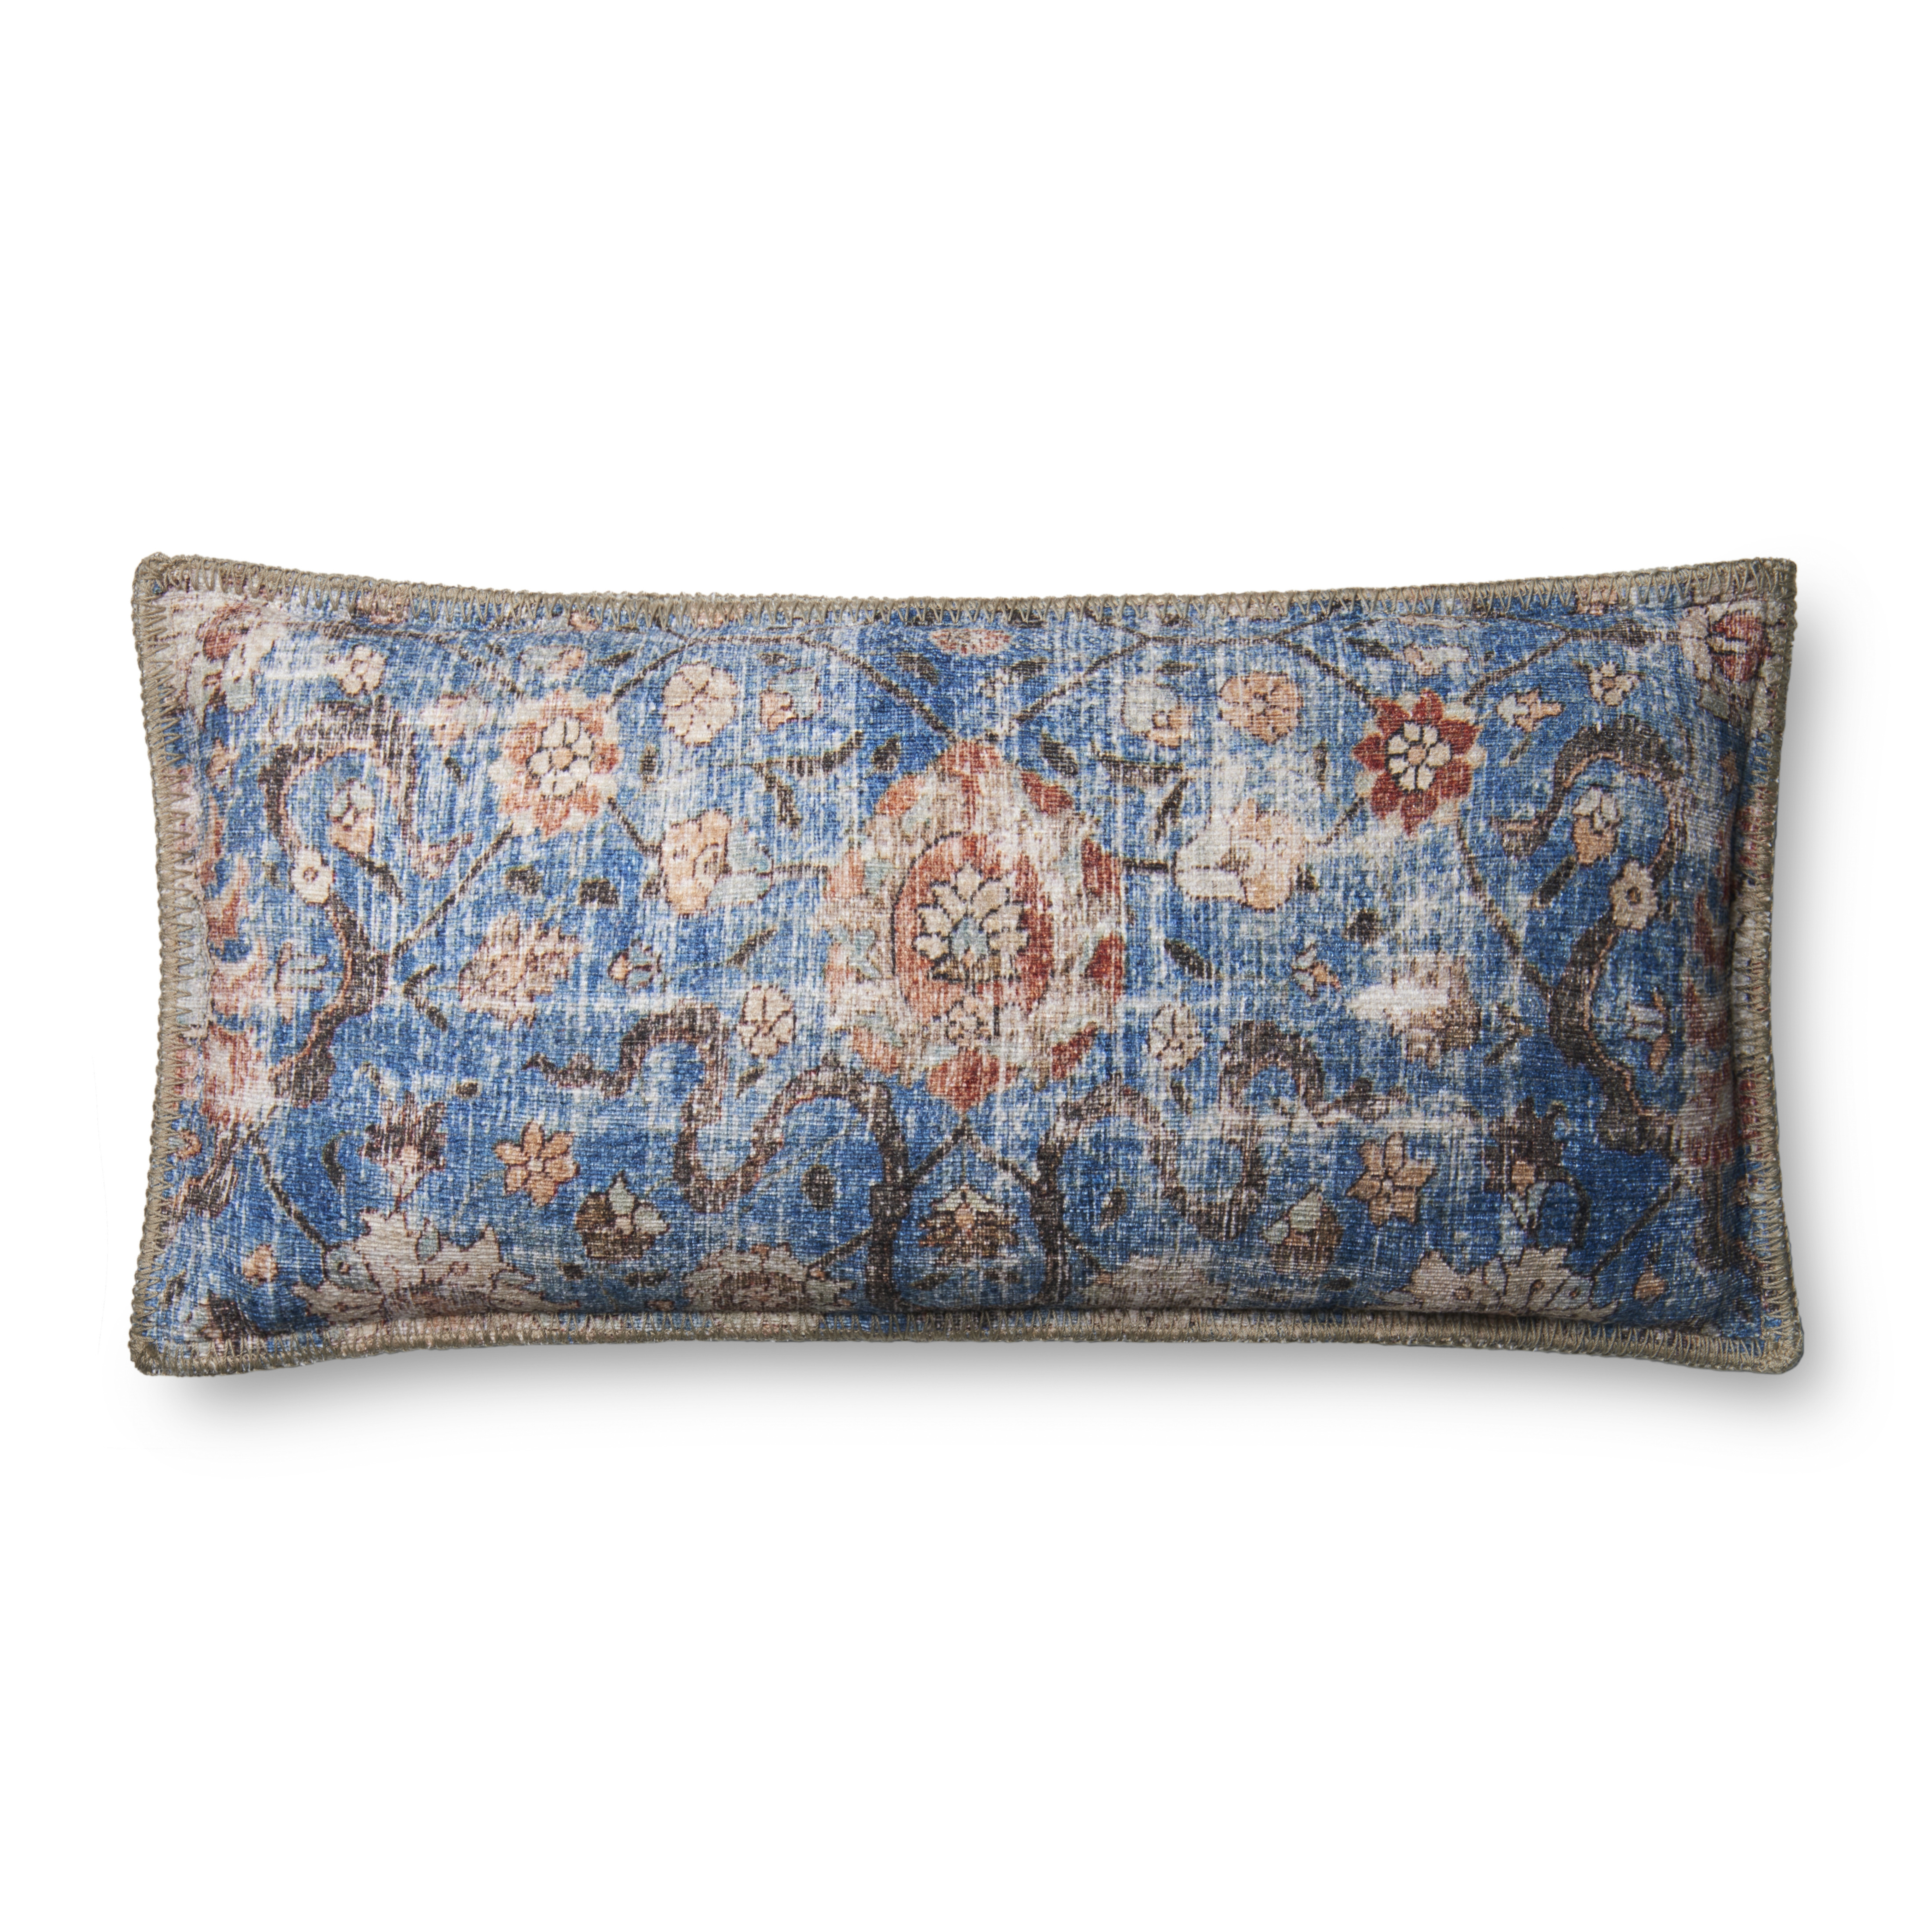 Loloi PILLOWS P0652 Blue / Multi 12" x 27" Cover Only - Loloi Rugs